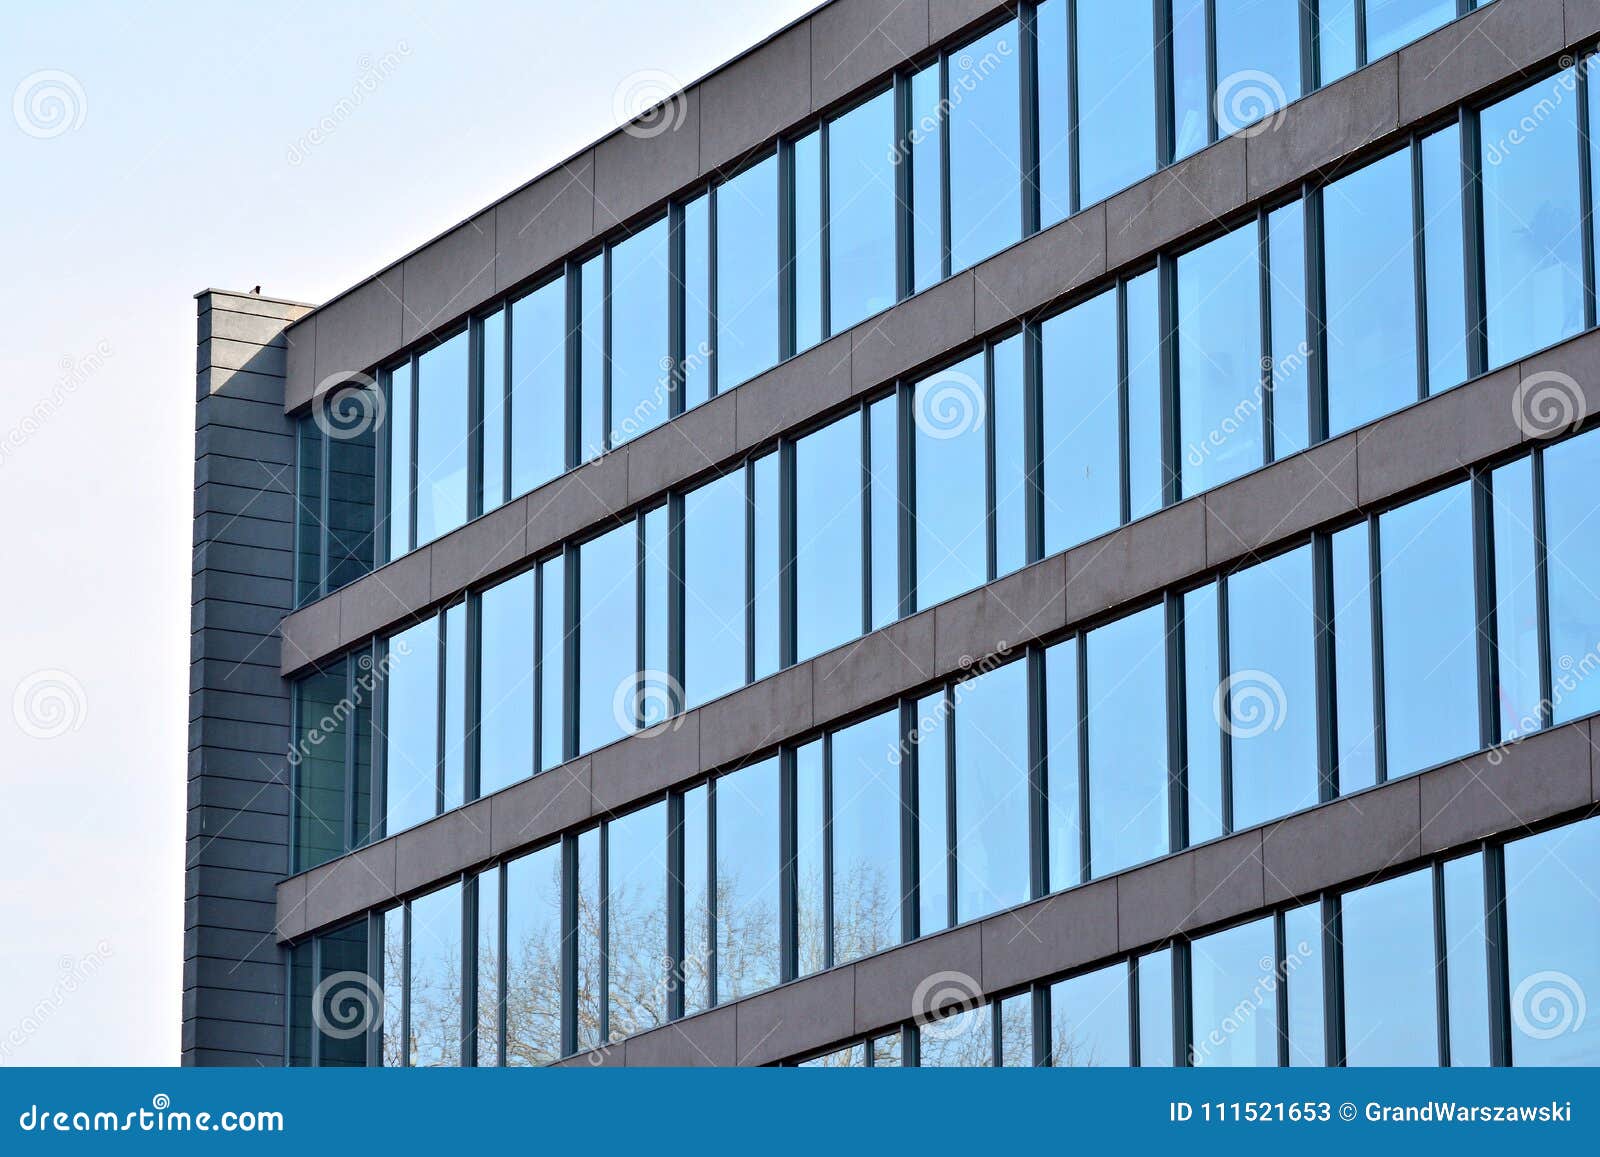 Glass Walls of a Office Building - Business Background Stock Image ...